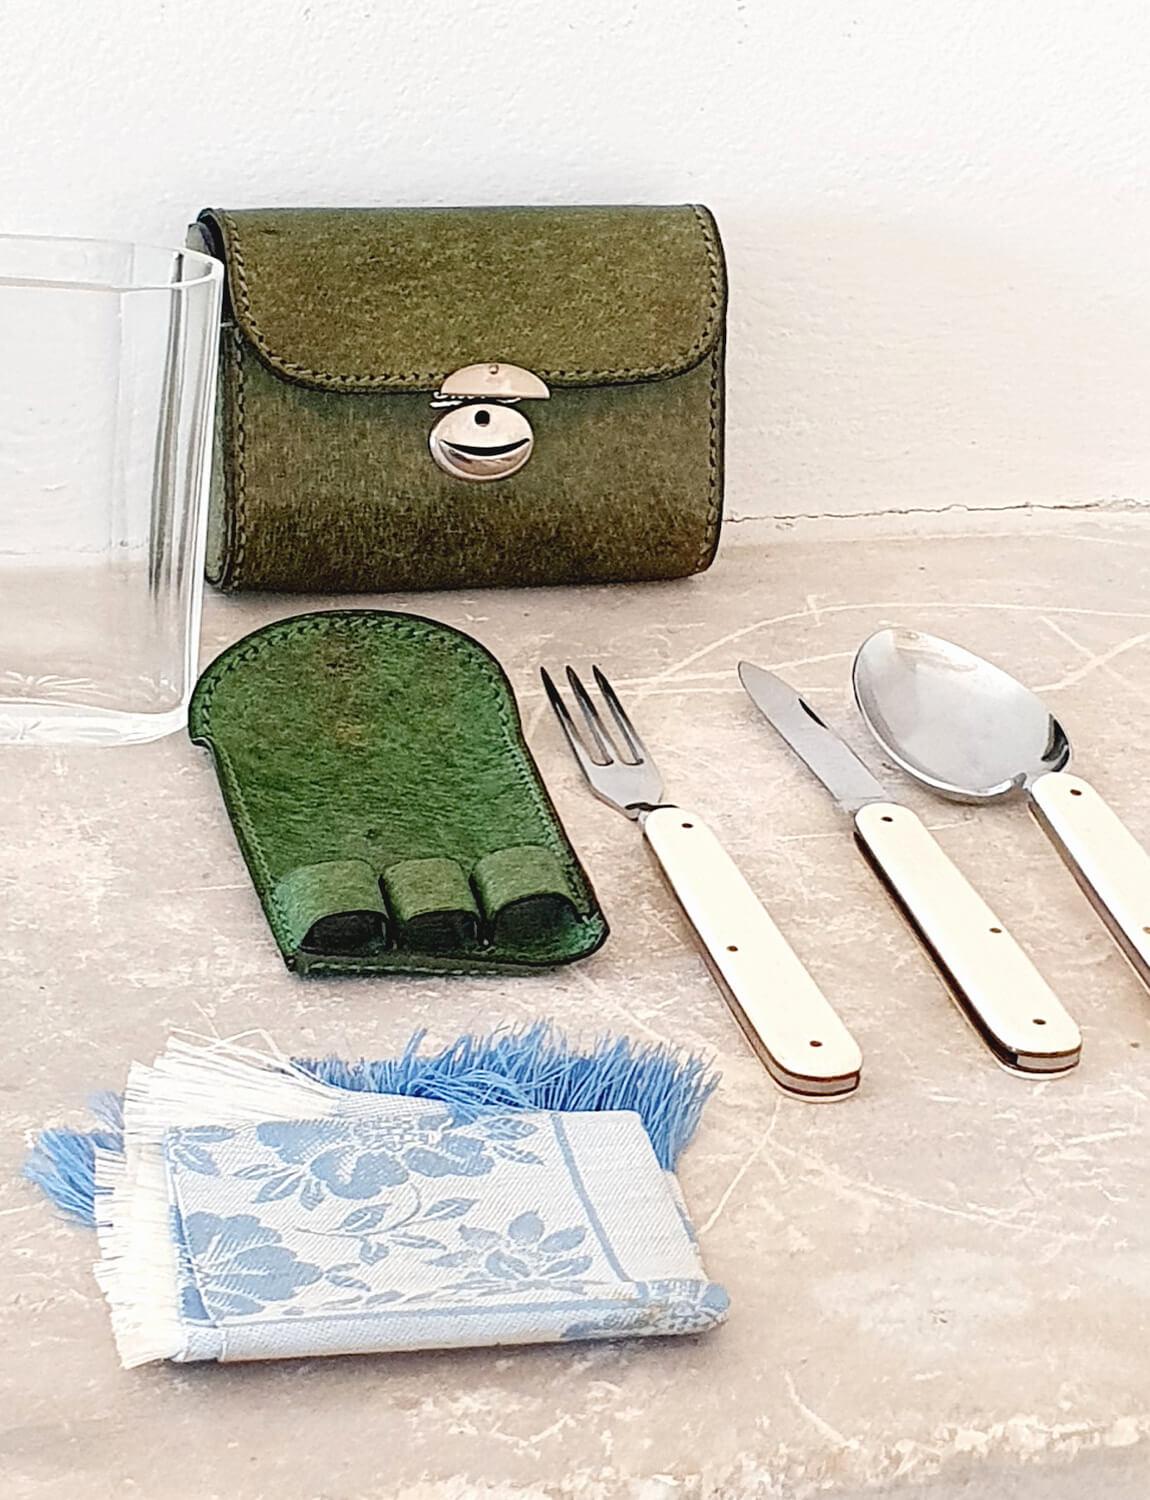 A very special original 1970s Gucci travel set containing folding knife, fork and spoon which neatly fit into a portable glass with napkin. The green leather case is stamped with Gucci and has a working silver clasp. It is so small it can fit into a